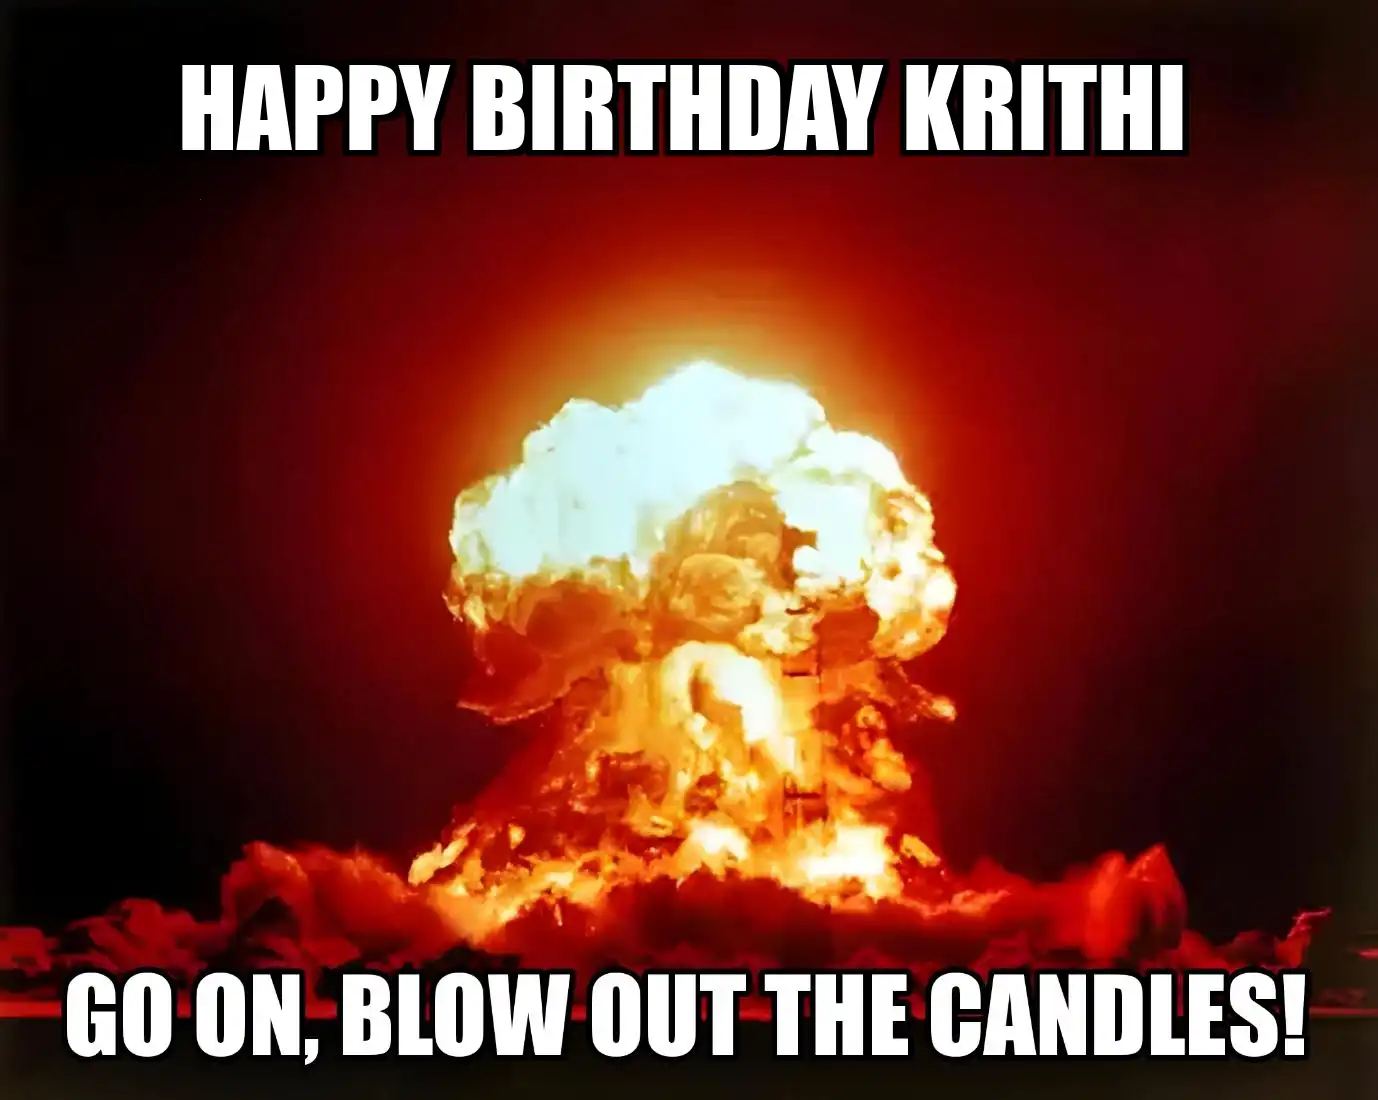 Happy Birthday Krithi Go On Blow Out The Candles Meme